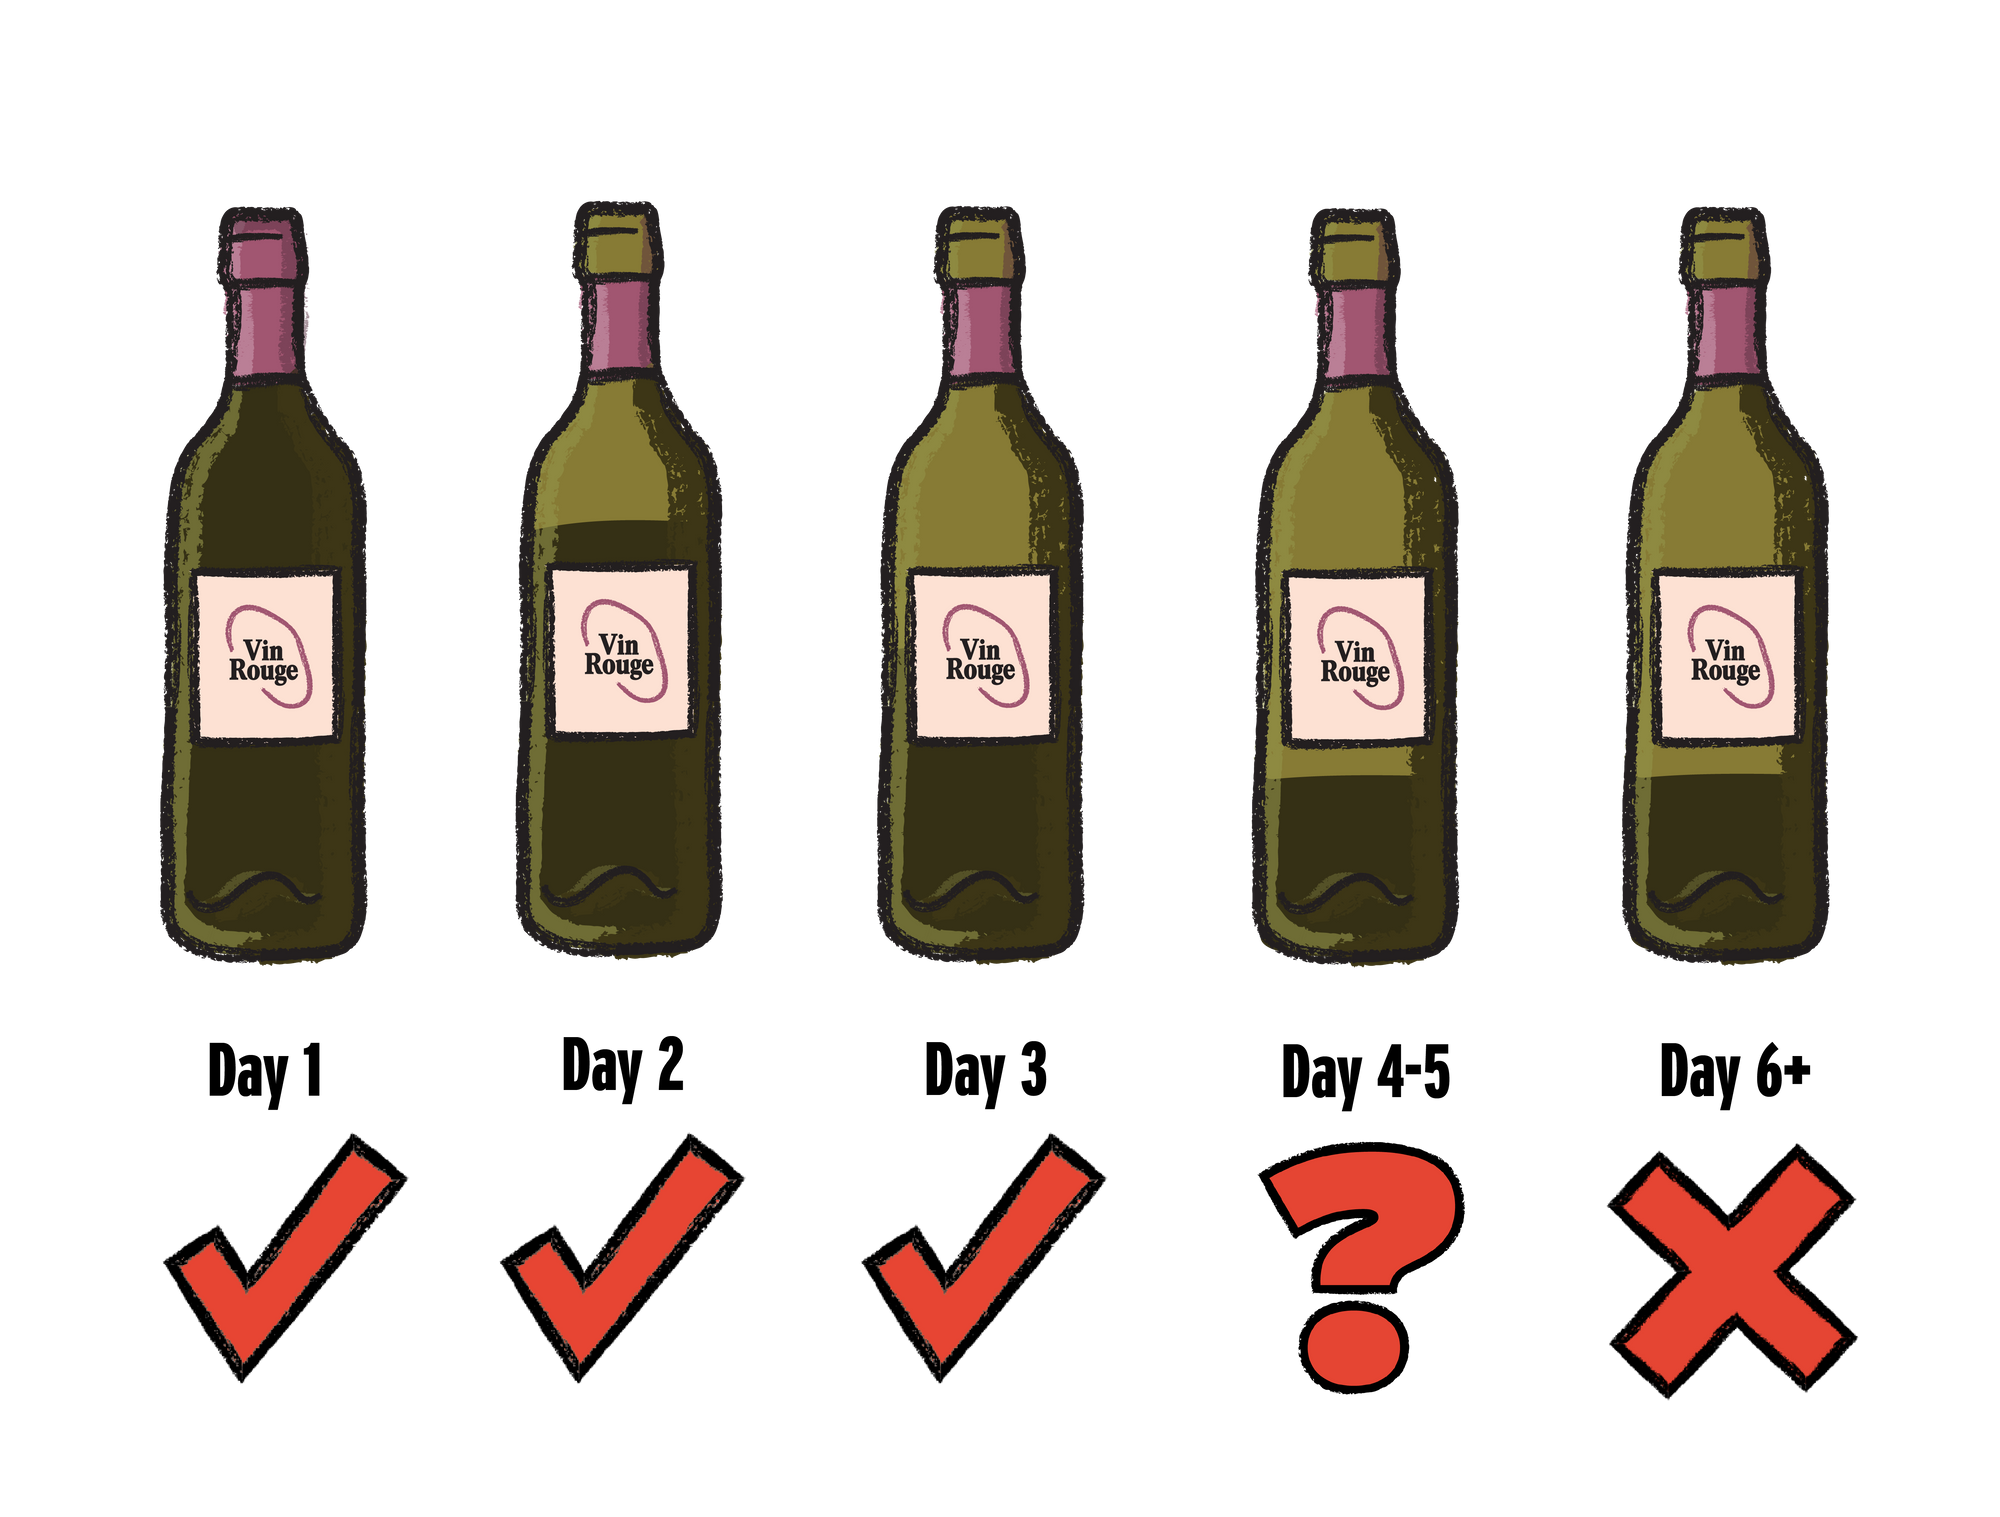 https://gpd-guides.ghost.io/content/images/2020/09/6._Serving_and_Storing_Guide_how_long_wine_open-27-27-27.png